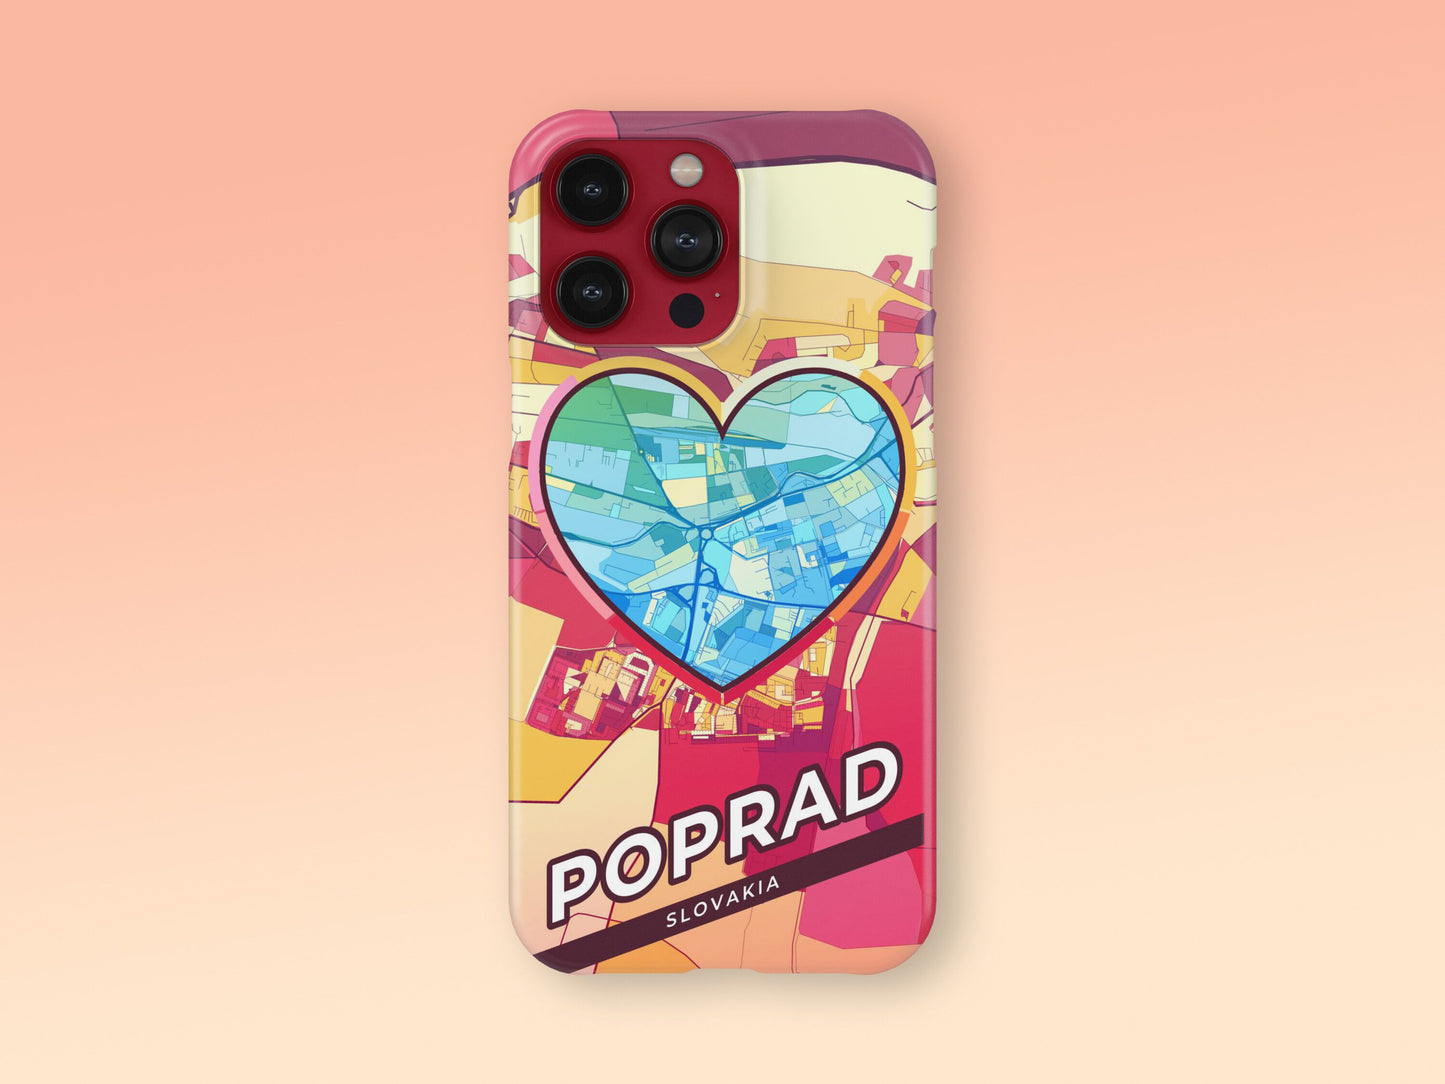 Poprad Slovakia slim phone case with colorful icon. Birthday, wedding or housewarming gift. Couple match cases. 2